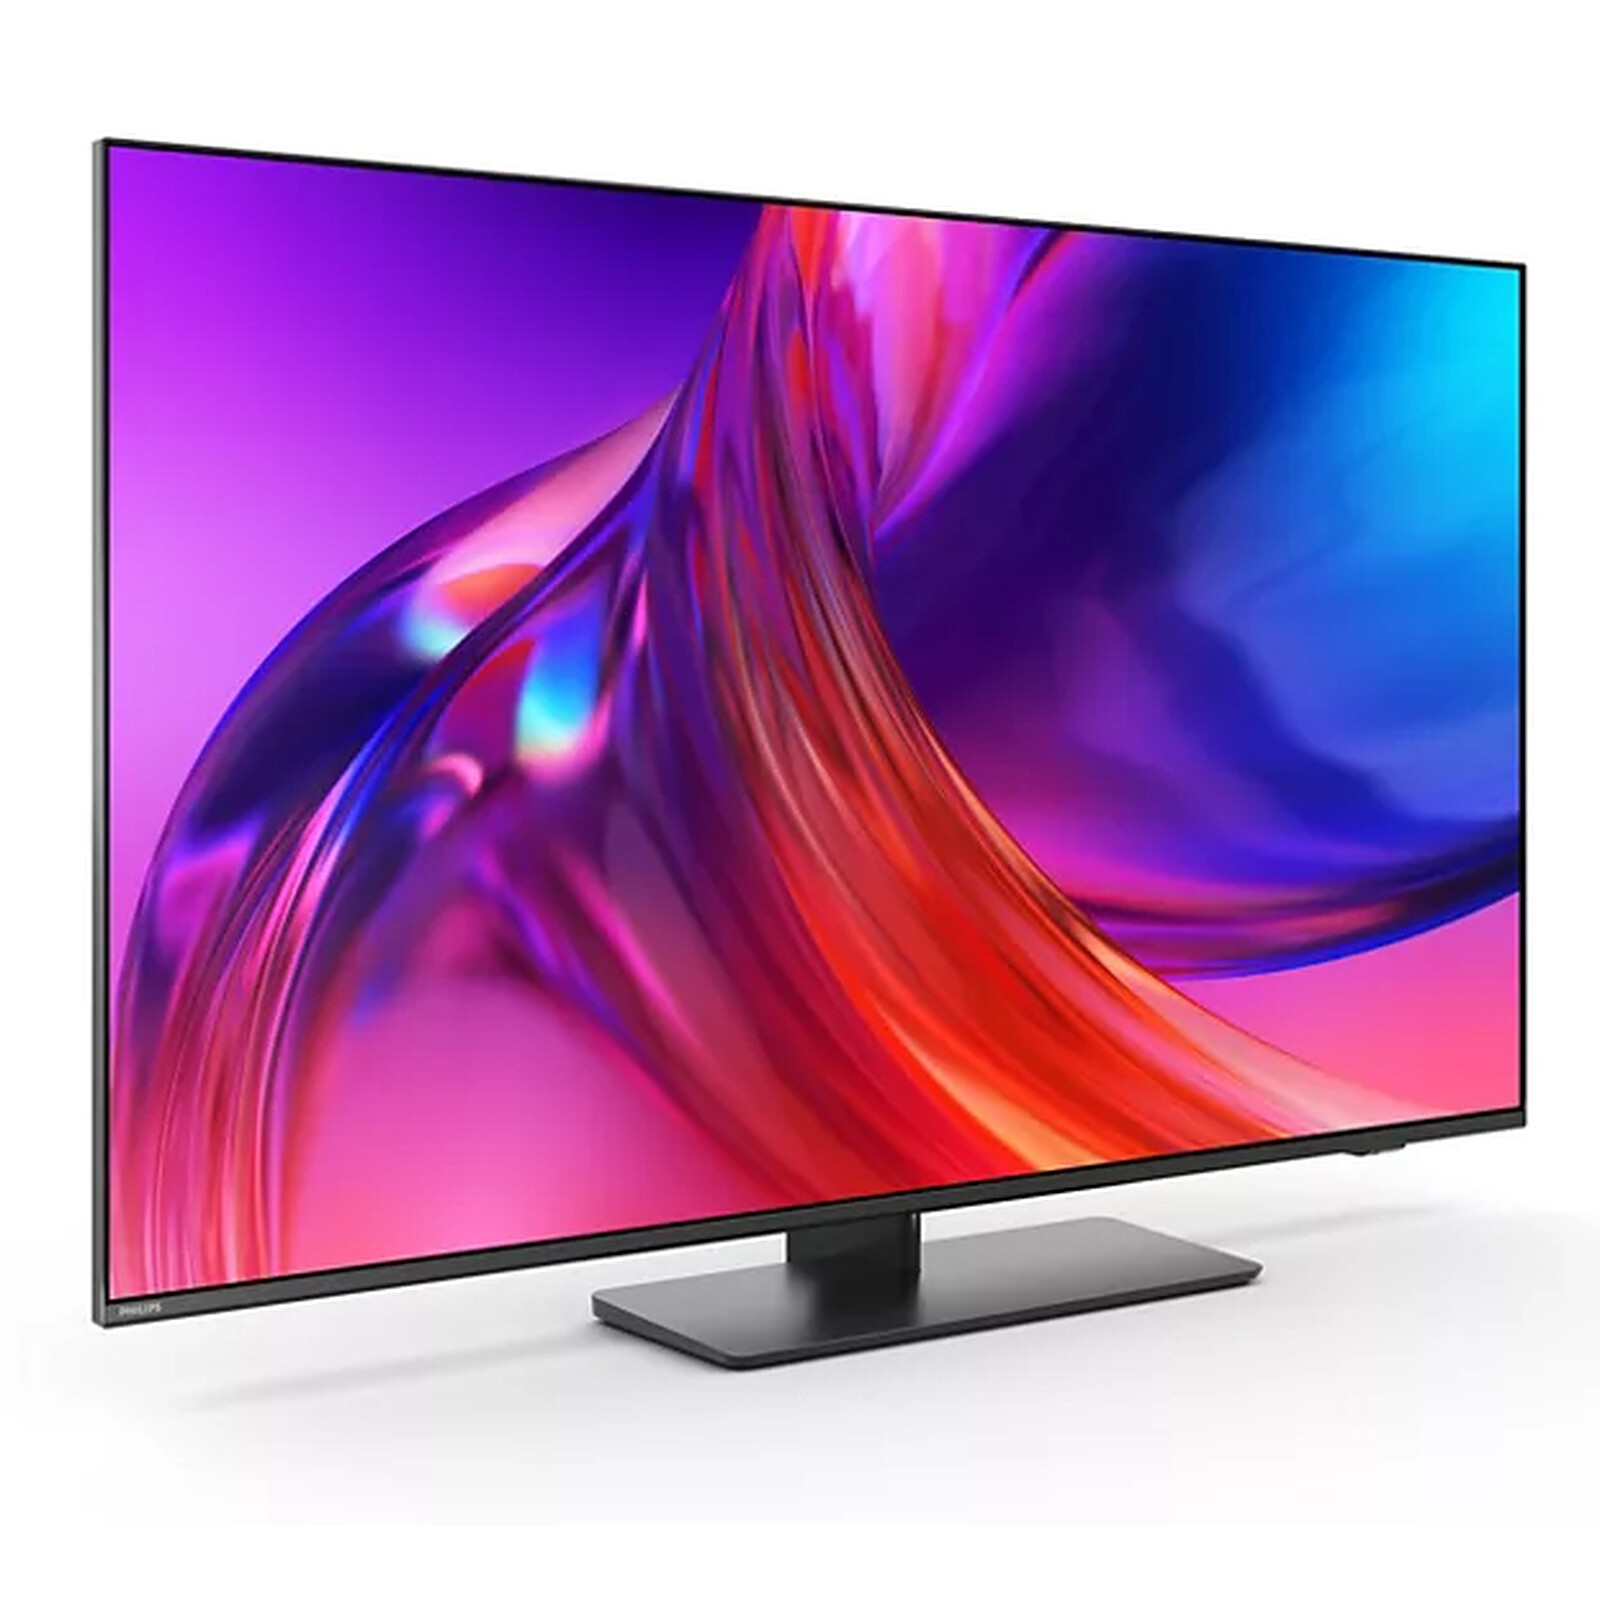 The Philips - LDLC One 50PUS8808/12 TV warranty - 3-year